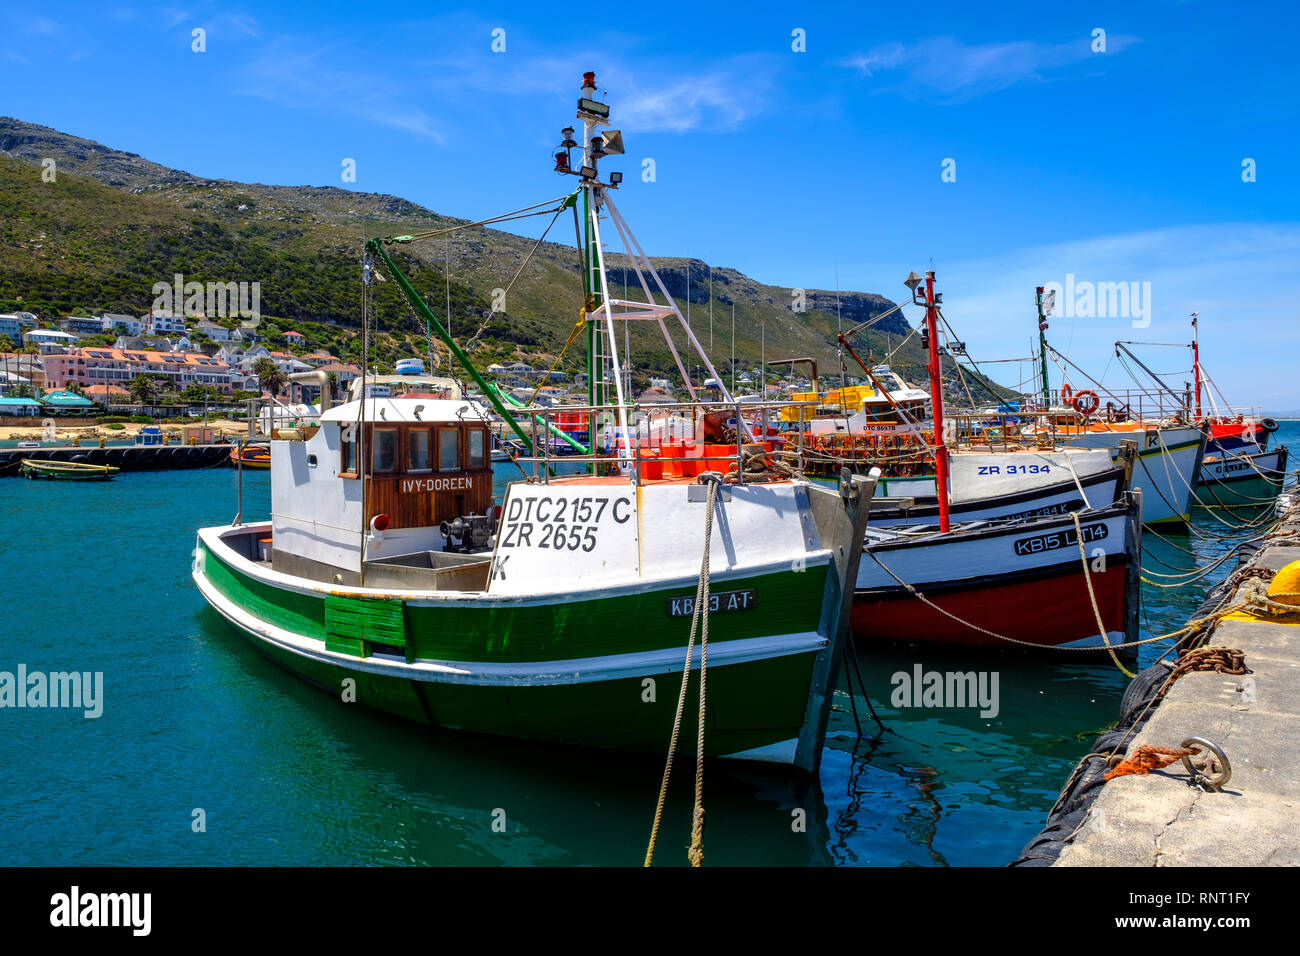 Fishing boats in Kalk Bay Harbour, near Cape Town, South Africa Stock Photo